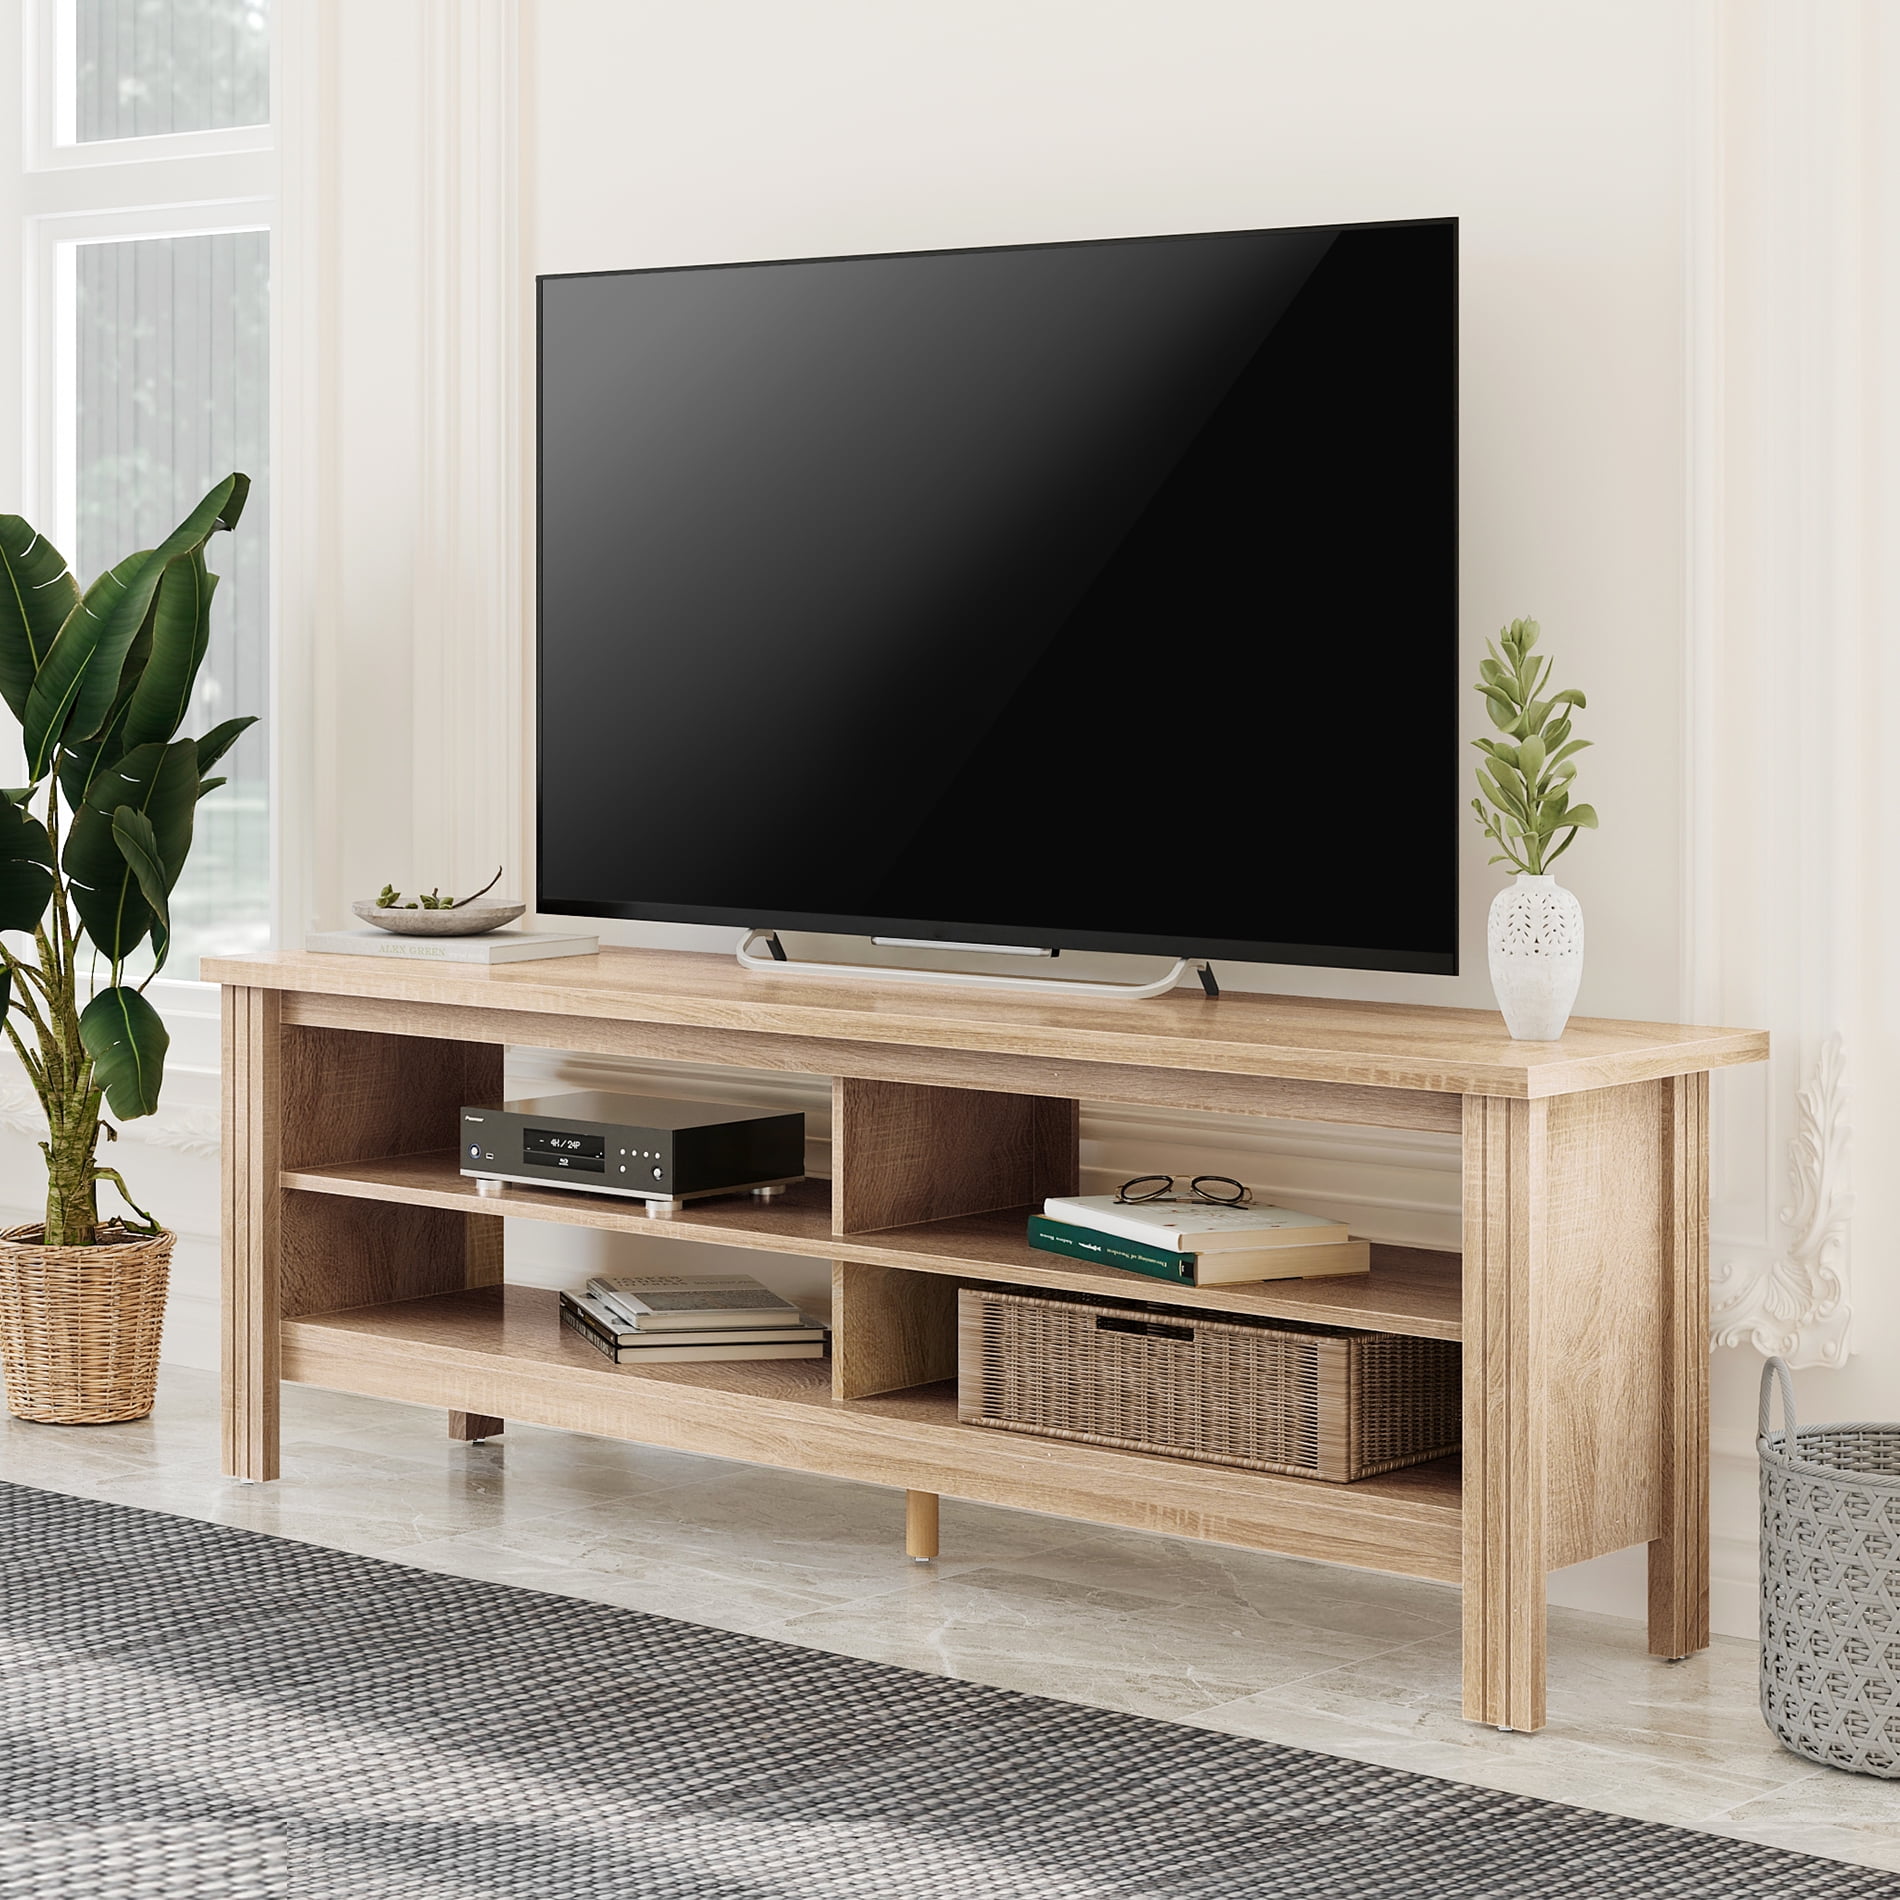 Details about   TV Stand For 55 Inch TV Flat Screens Mount Entertainment Center Storage Shelves 